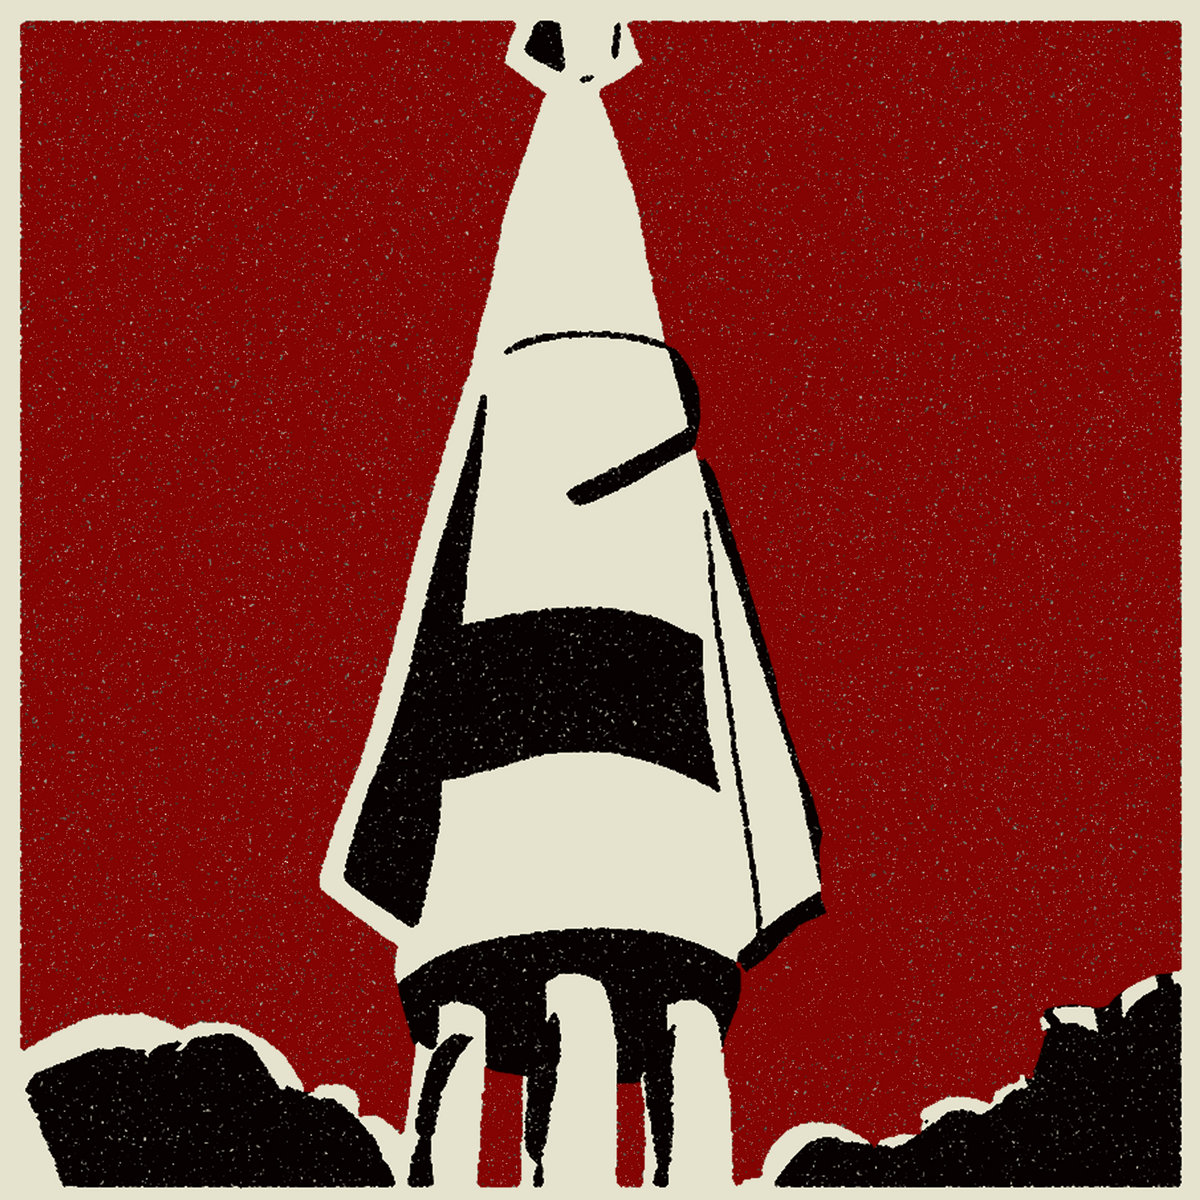 LP cover for Think Fast. depicts a rocket taking off